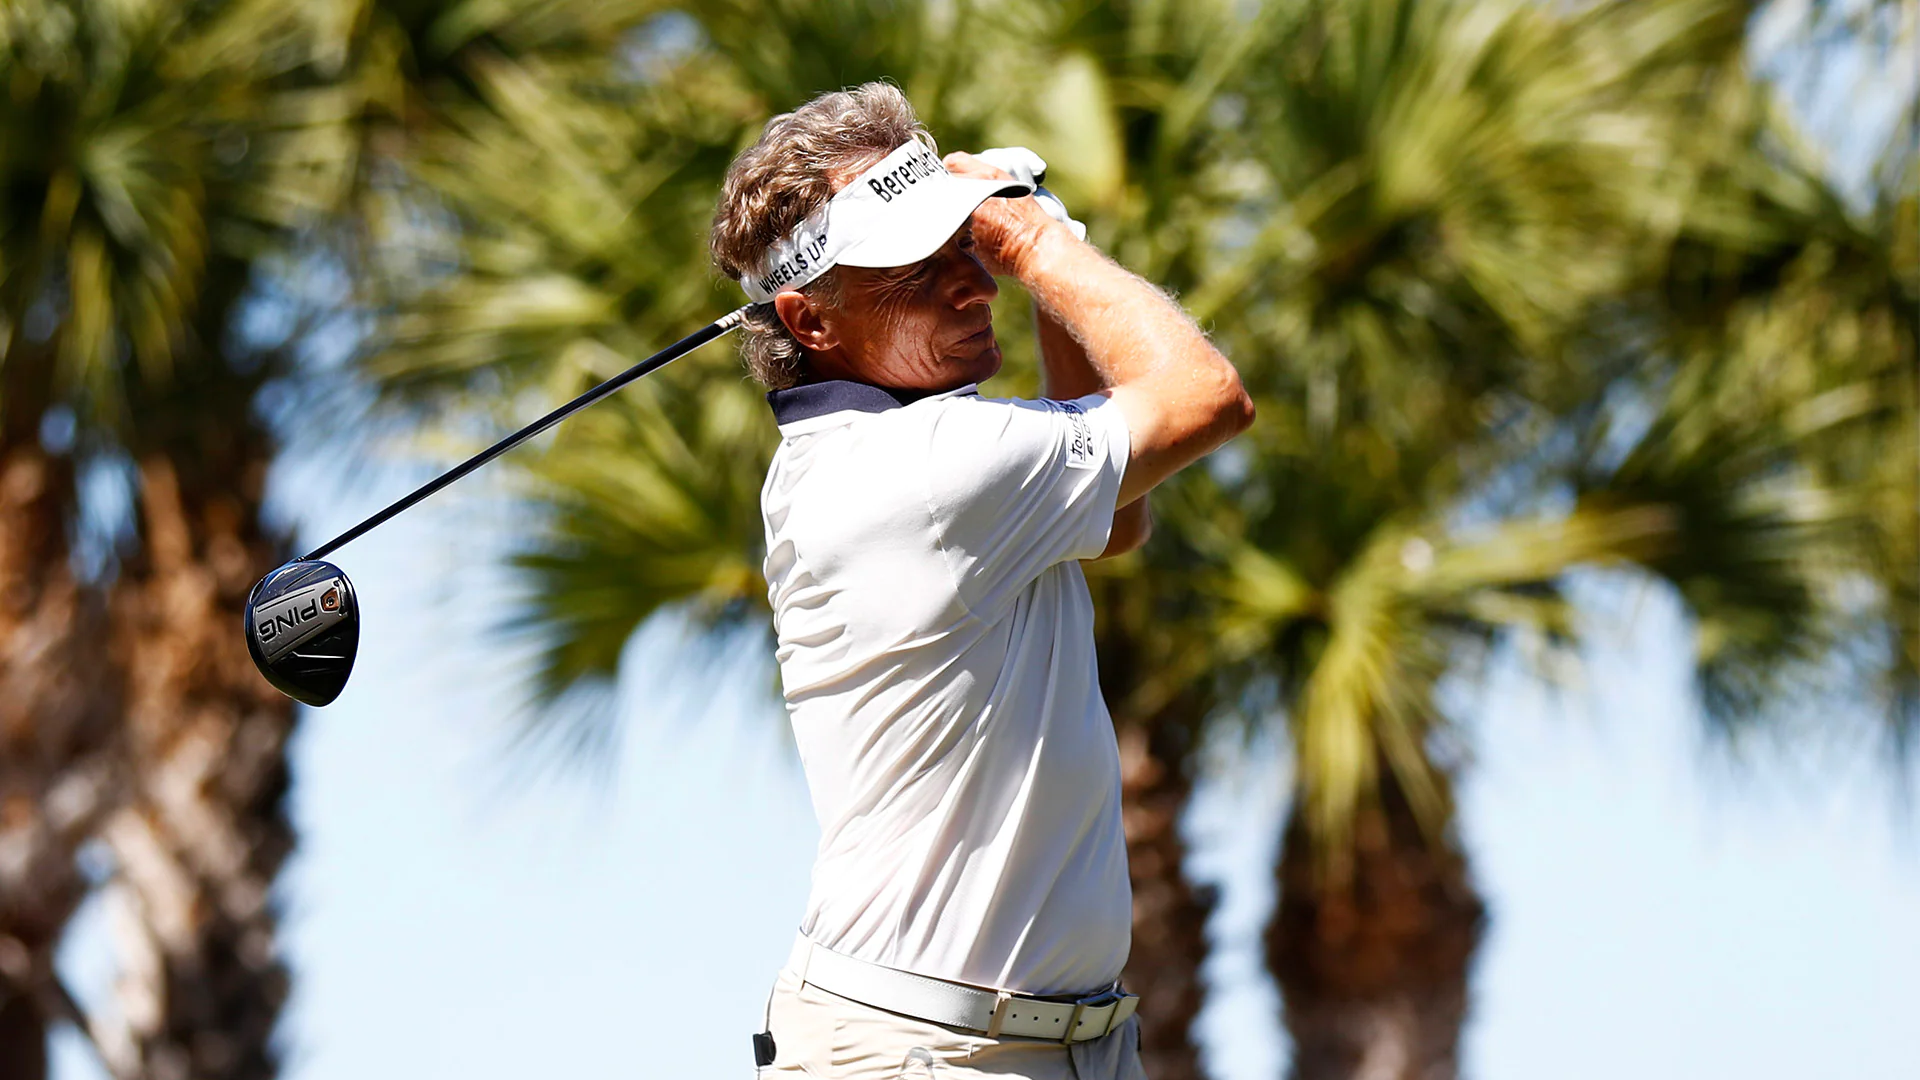 Bernhard Langer honing in on Hale Irwin’s record with Chubb Classic title